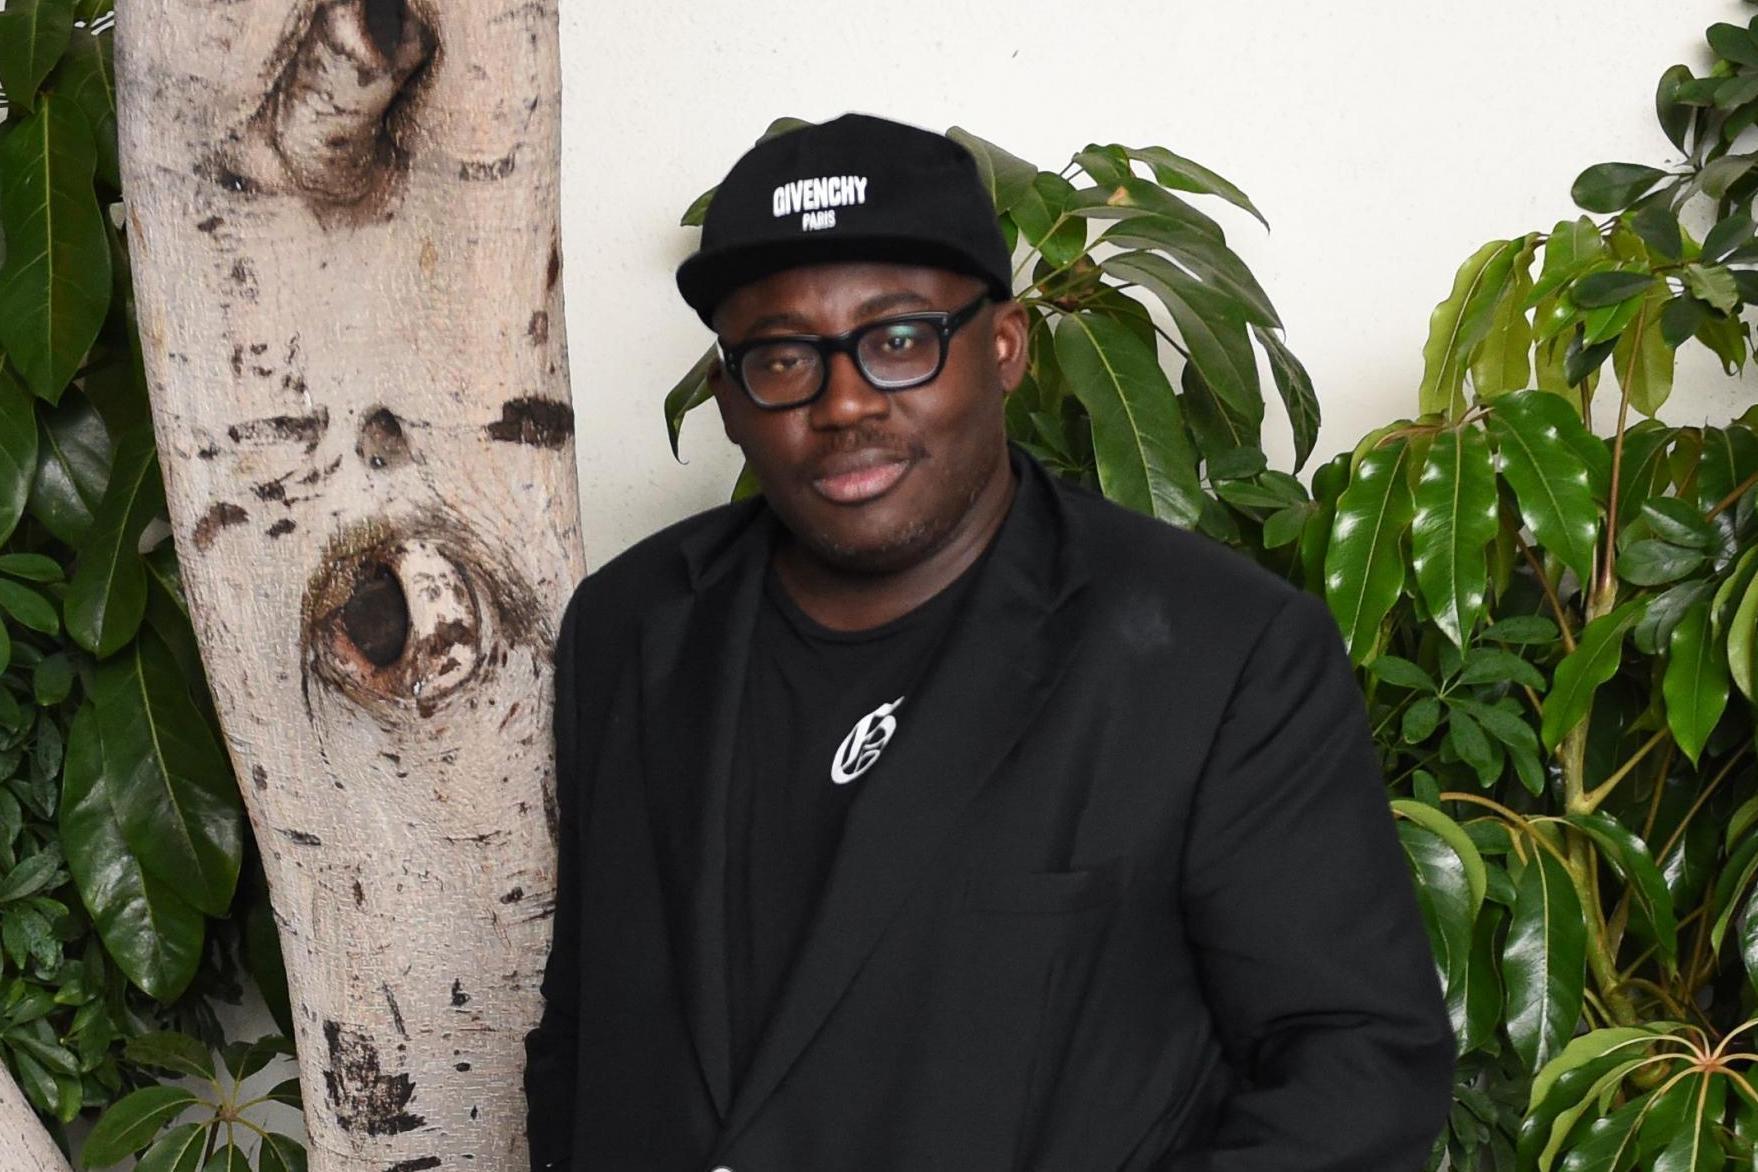 Enninful will be the first male to edit British Vogue in its entire 100-year history